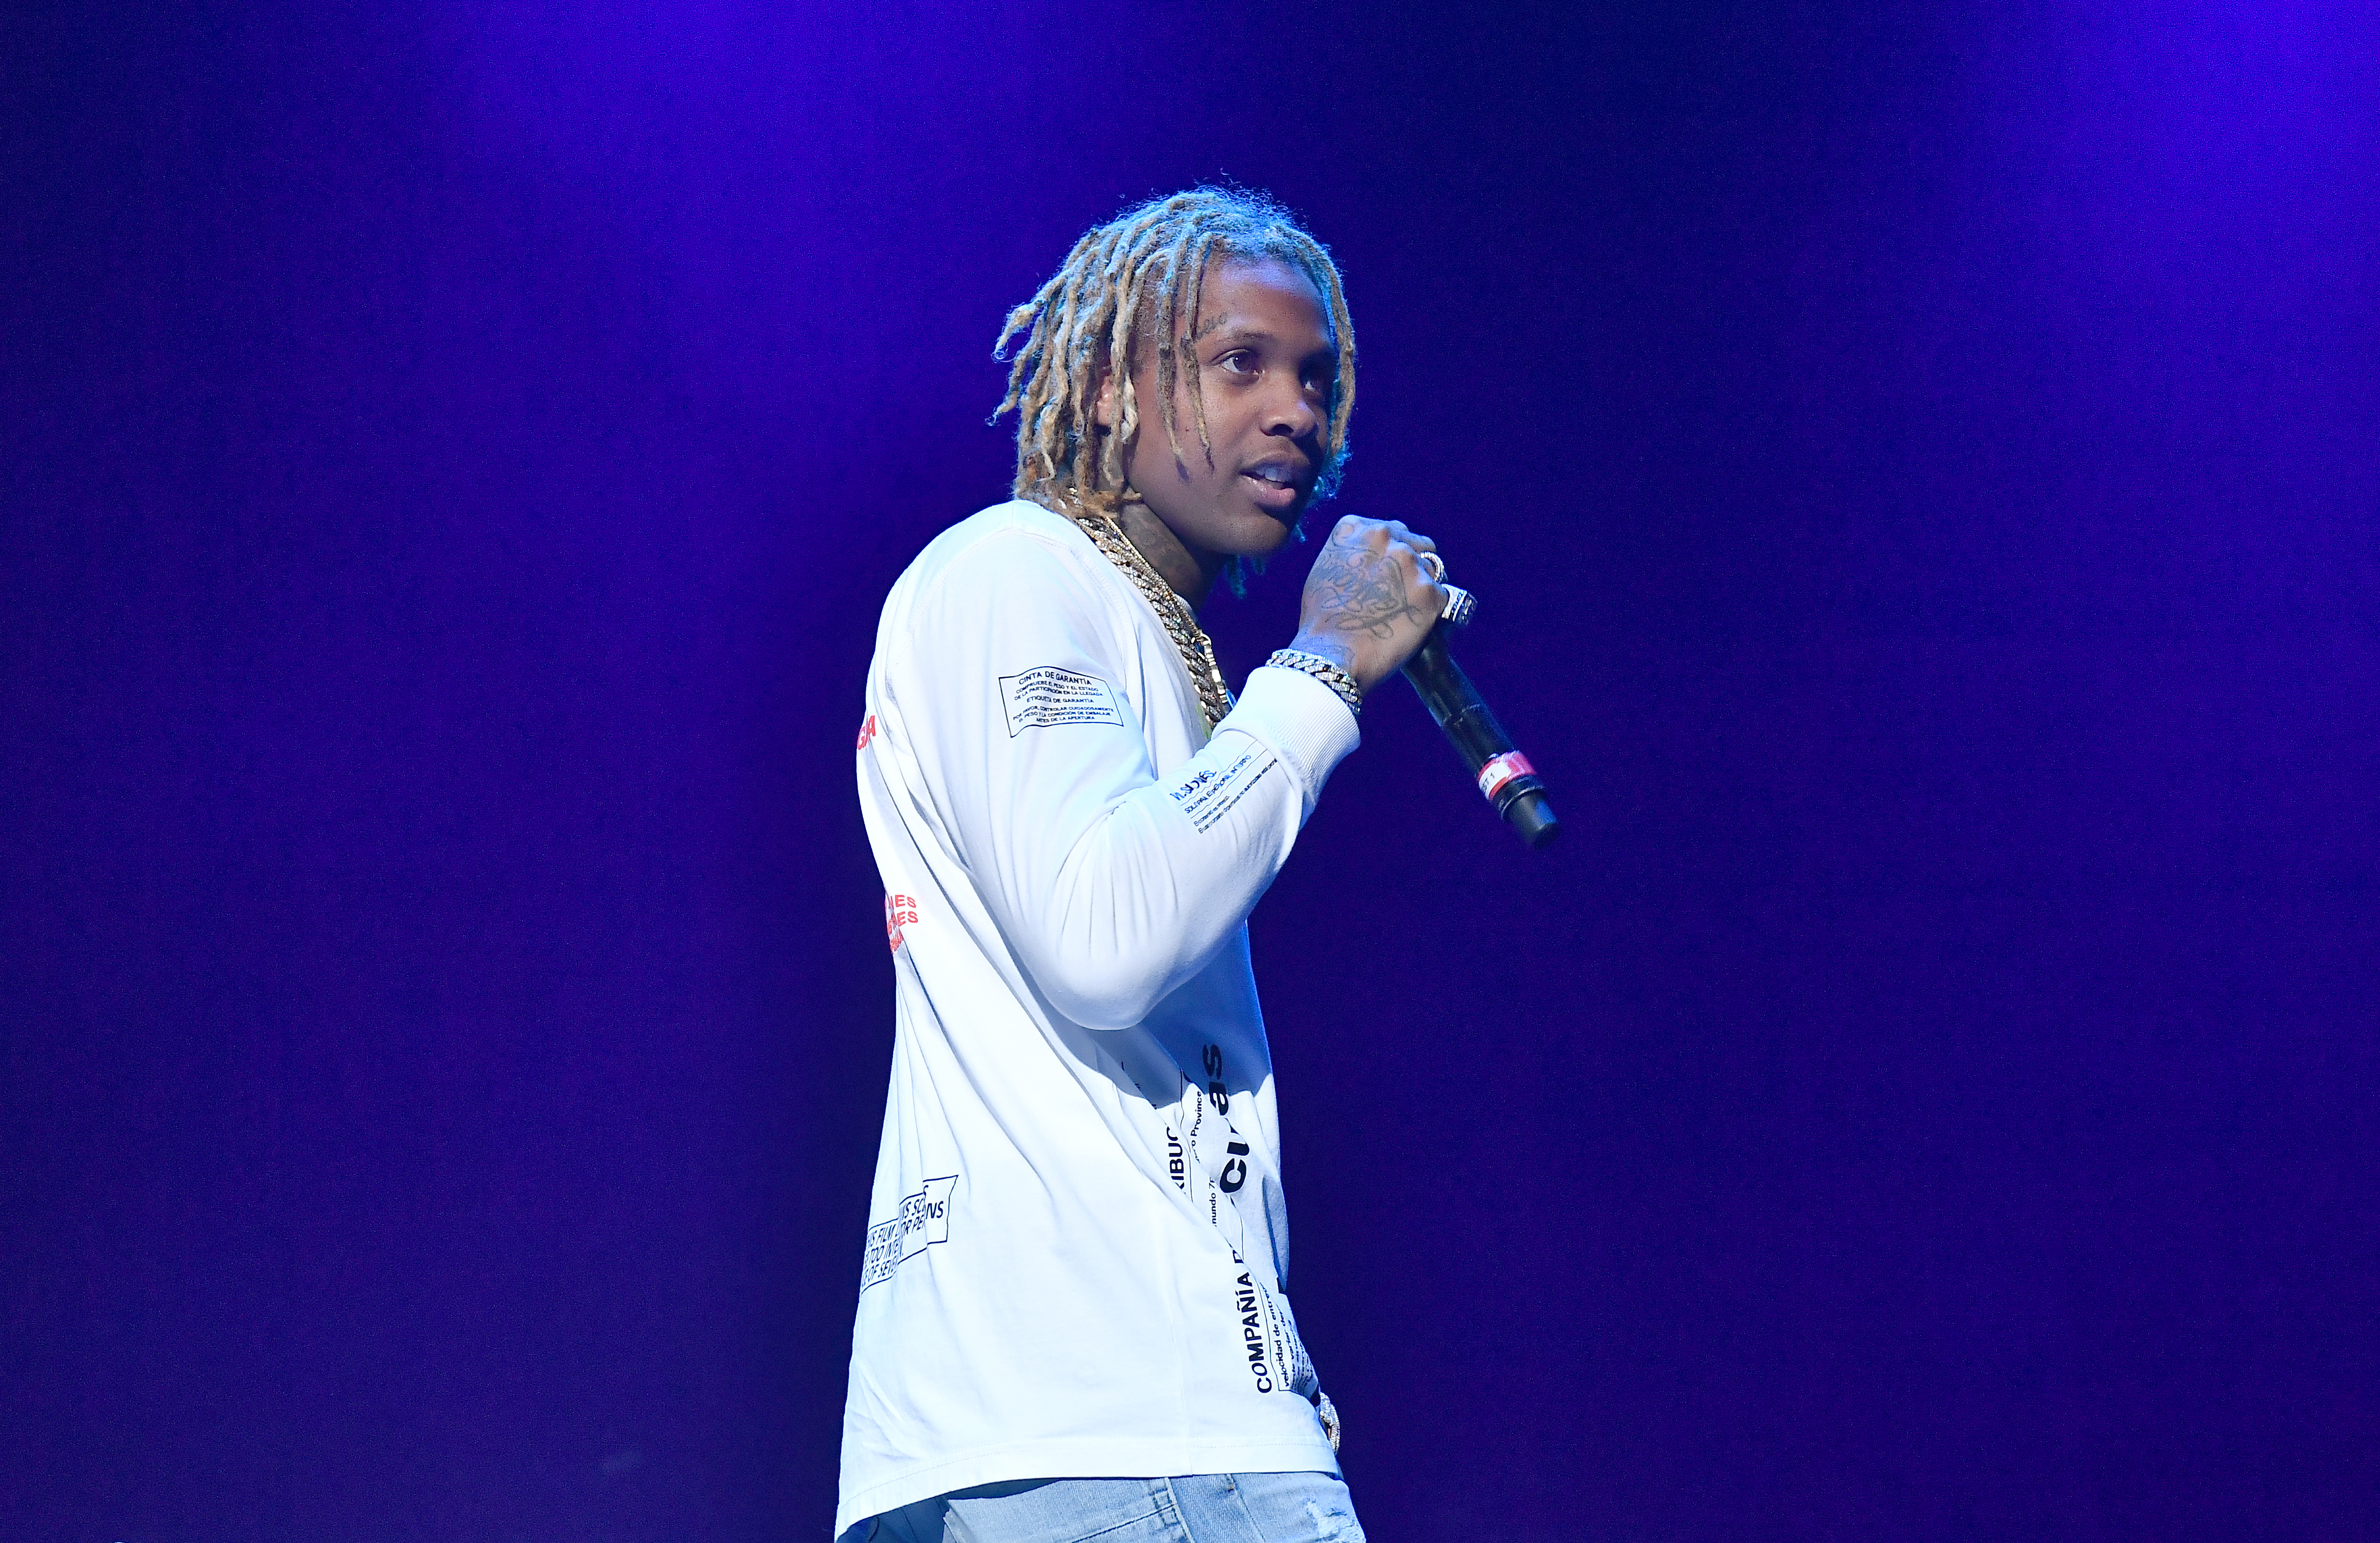 Atlanta Detective Reportedly Says There Is Video Of Lil Durk Shooting A Gun While Driving Near The Varsity